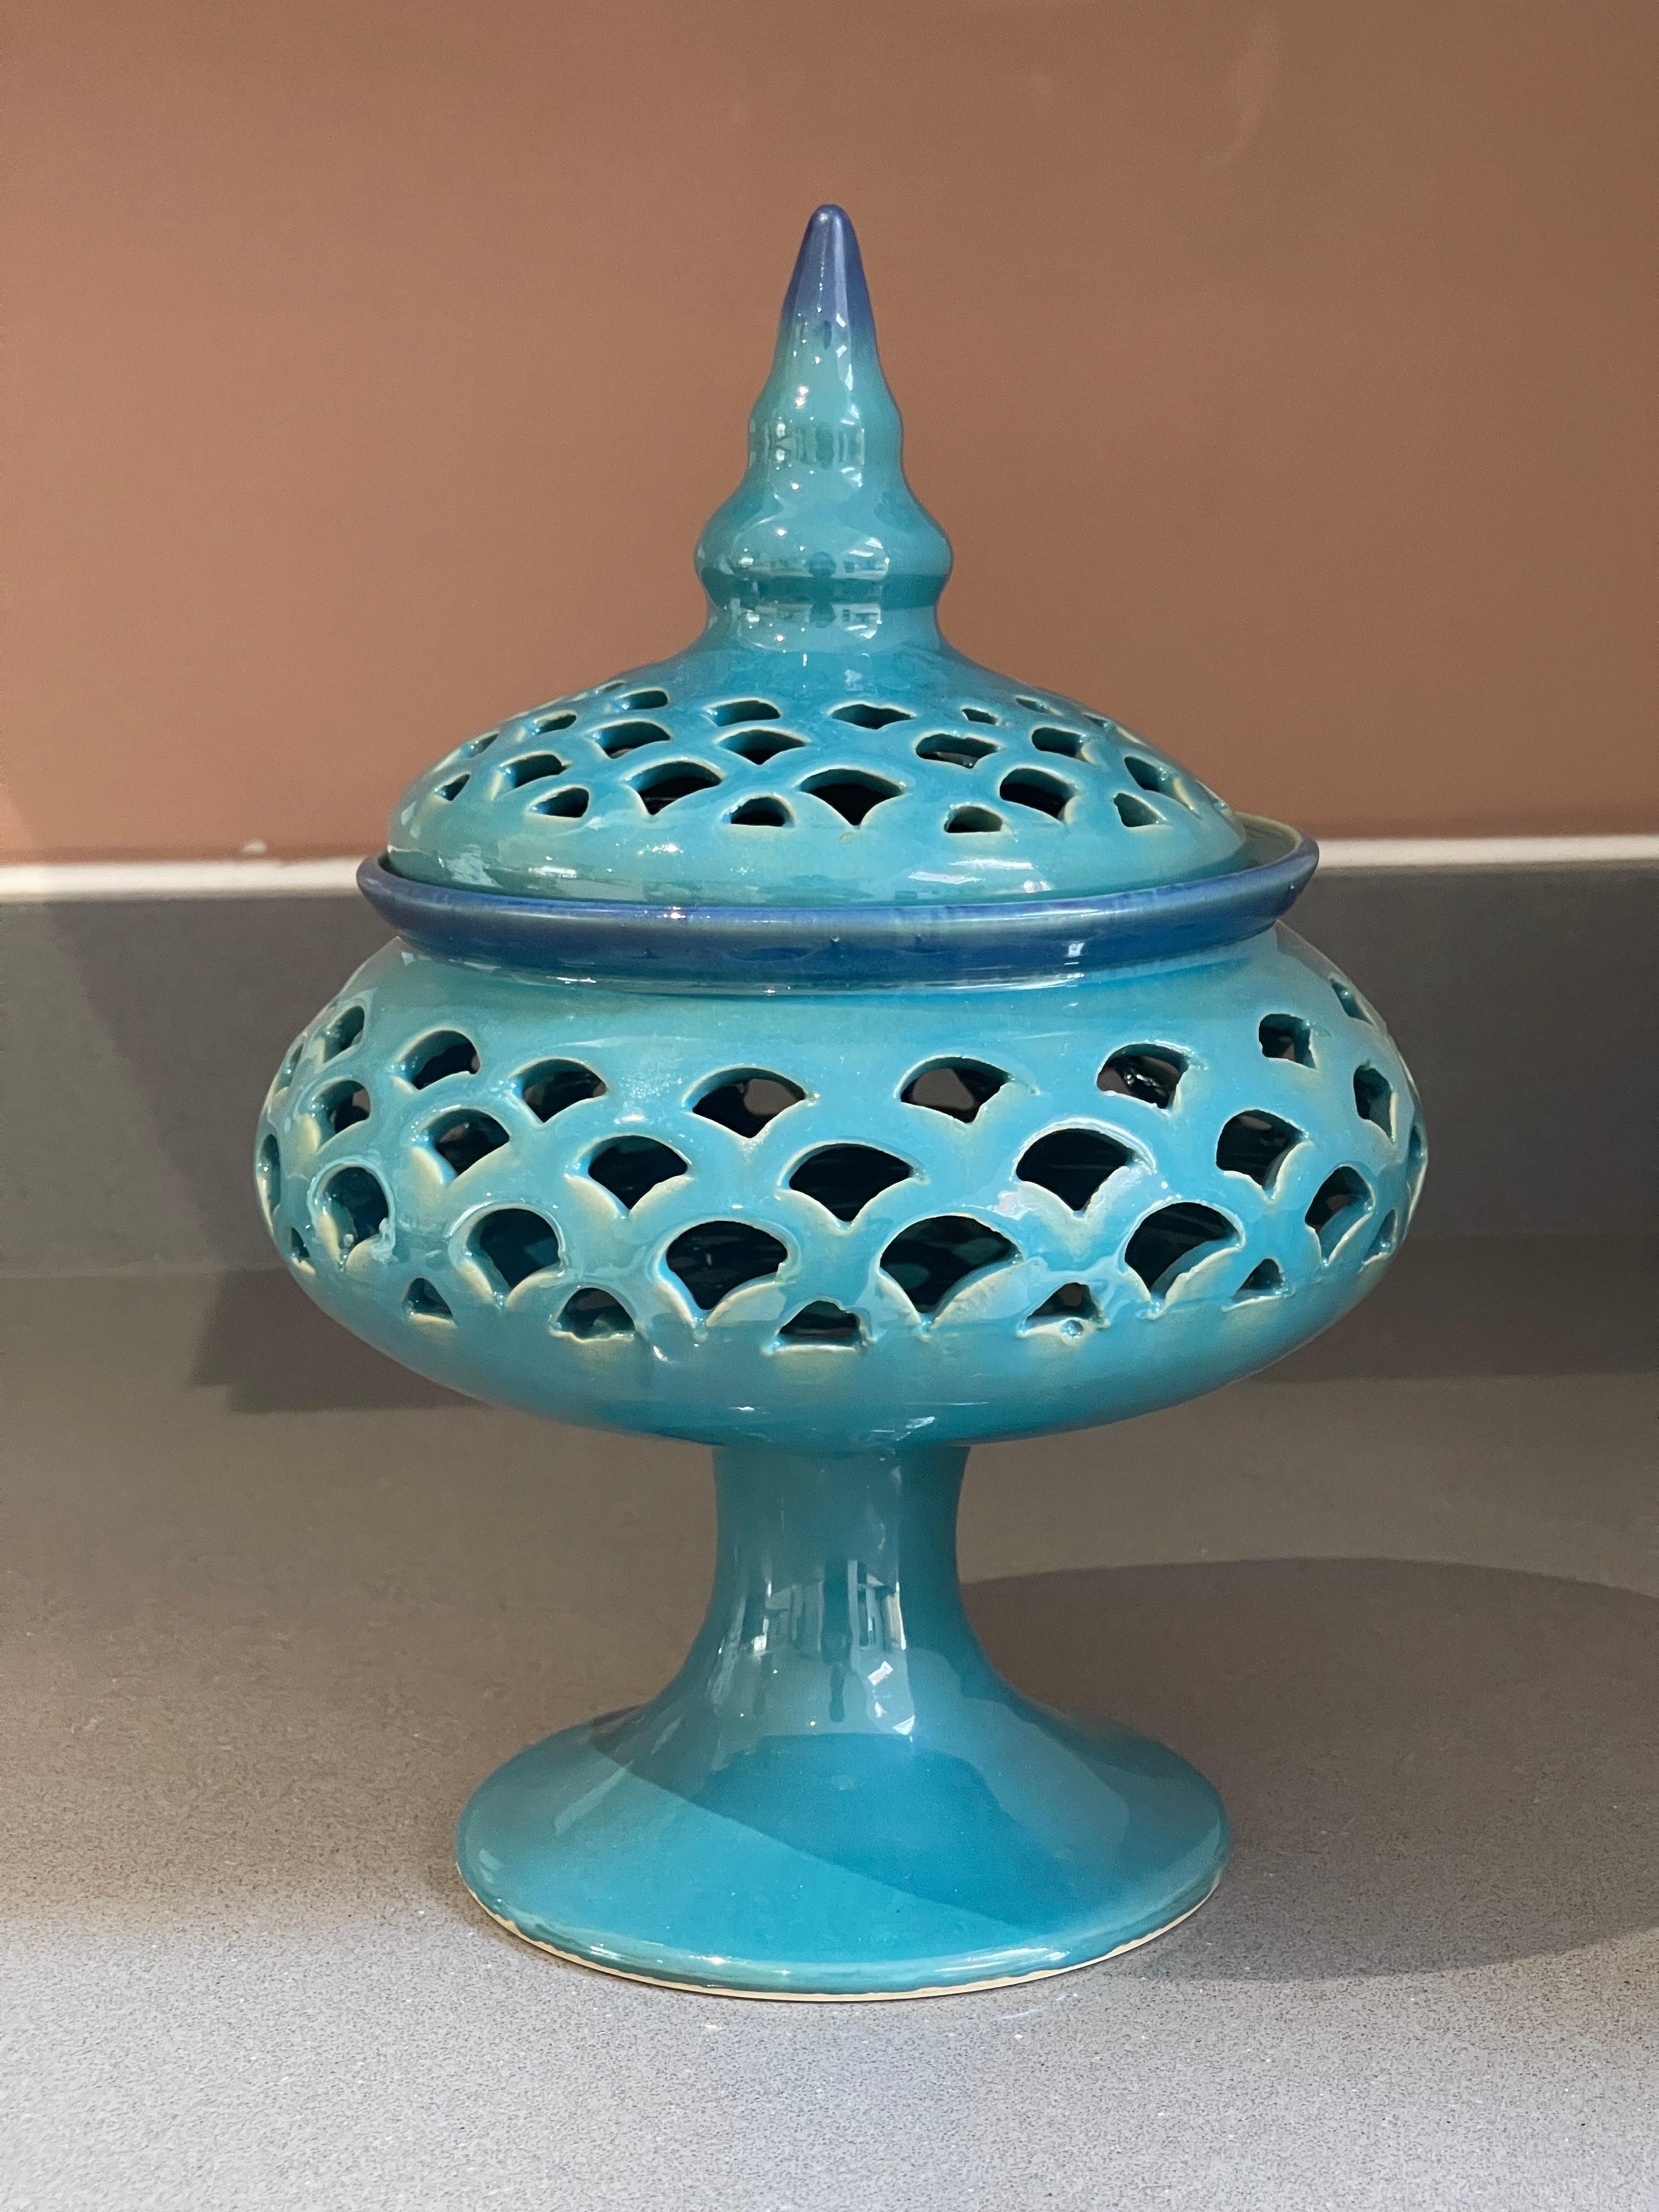 Turquoise blue Blue Ceramic Torches With Stand &Lid, Vintage Ceramic Candle Holder Hand Crafted, pressed, cast, and chased. Circular, curved feet stand.
Highly collectable and valuable.
Measures: H x W x D: 25 x 15 x 14 cm.


It is in beautifully